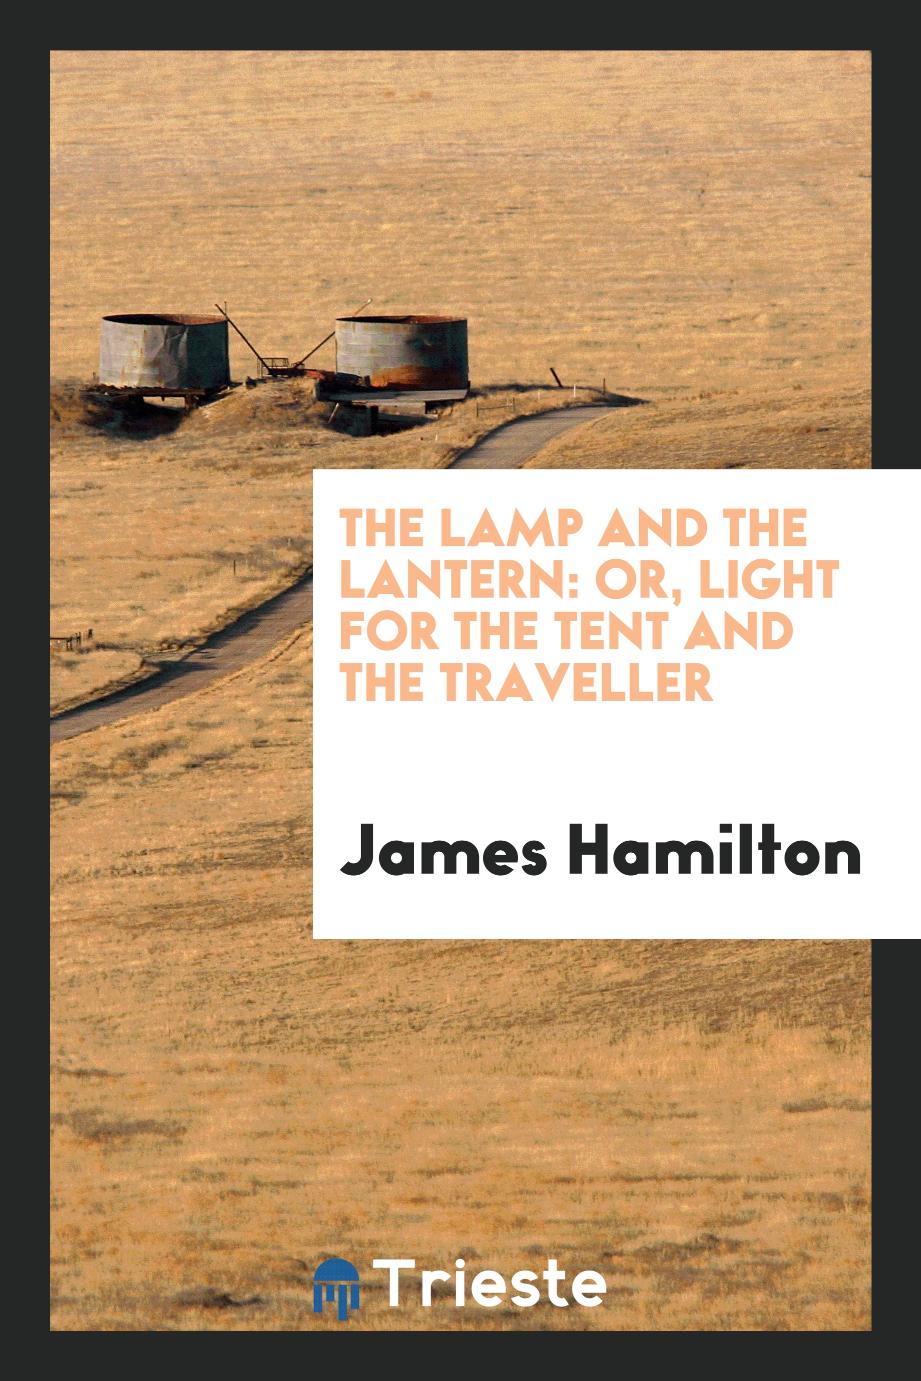 The Lamp and the Lantern: Or, Light for the Tent and the Traveller